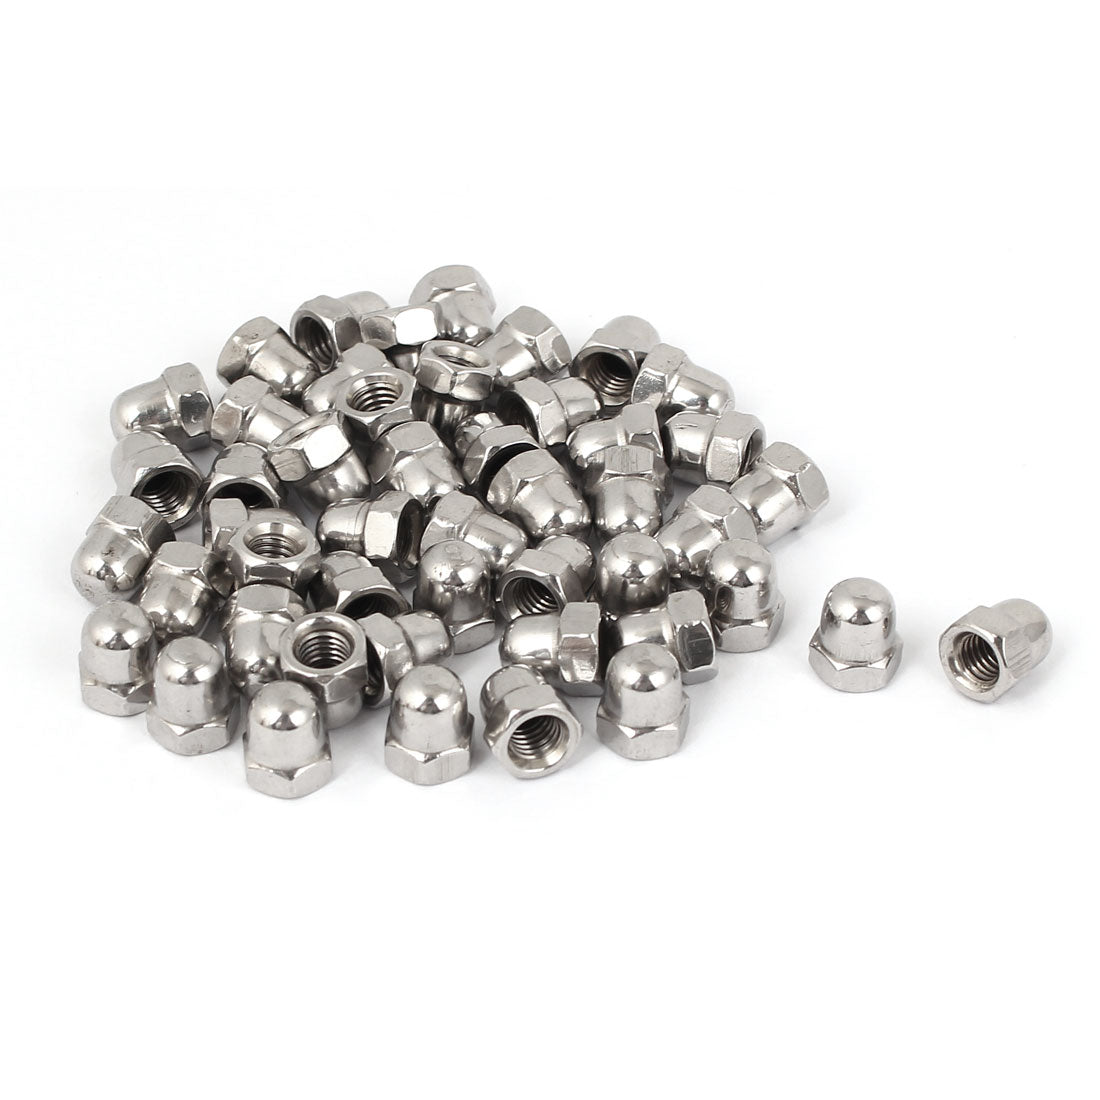 Uxcell Uxcell M5 Thread Dia Dome Head Stainless Steel Cap Acorn Hex Nuts 50pcs